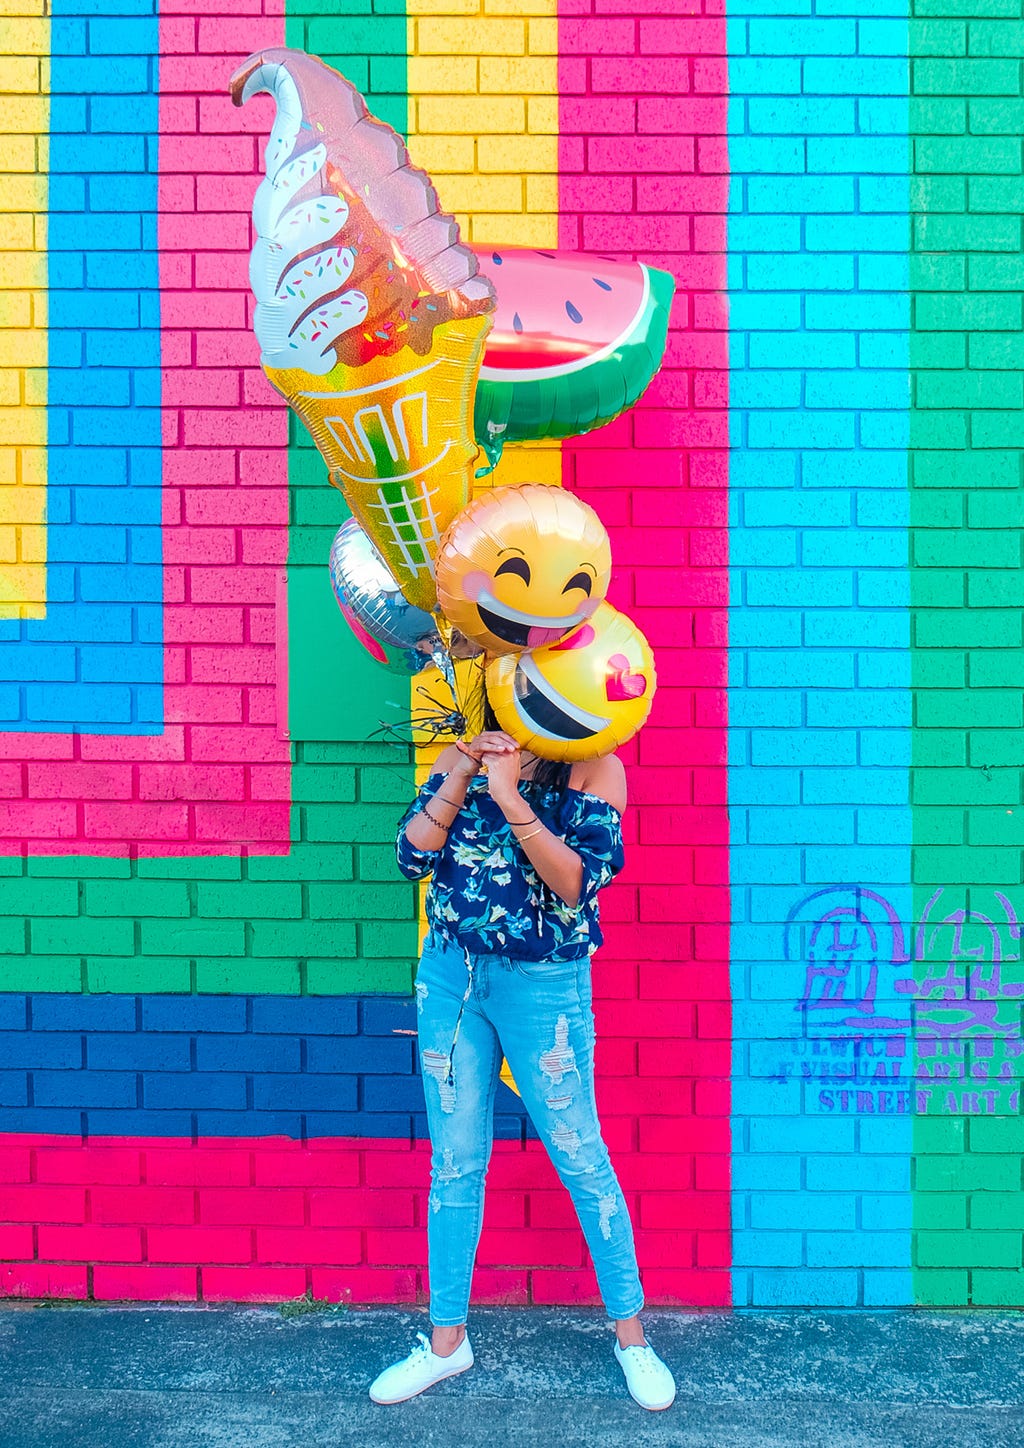 A young girl covering face with smiley balloons with colourful and vibrant background.